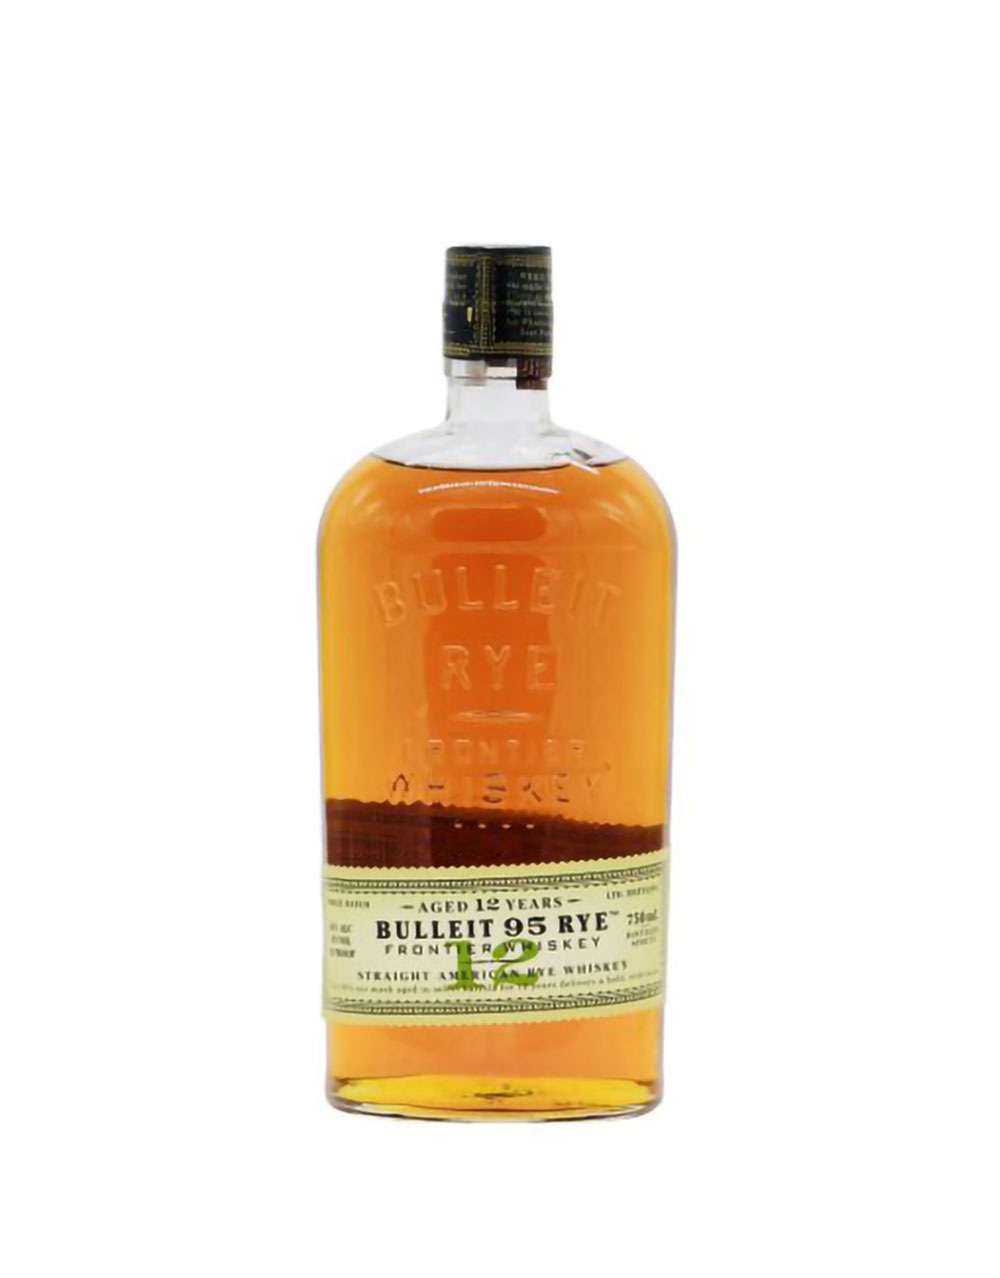 Bulleit 12 Year Old Straight American Rye Whiskey